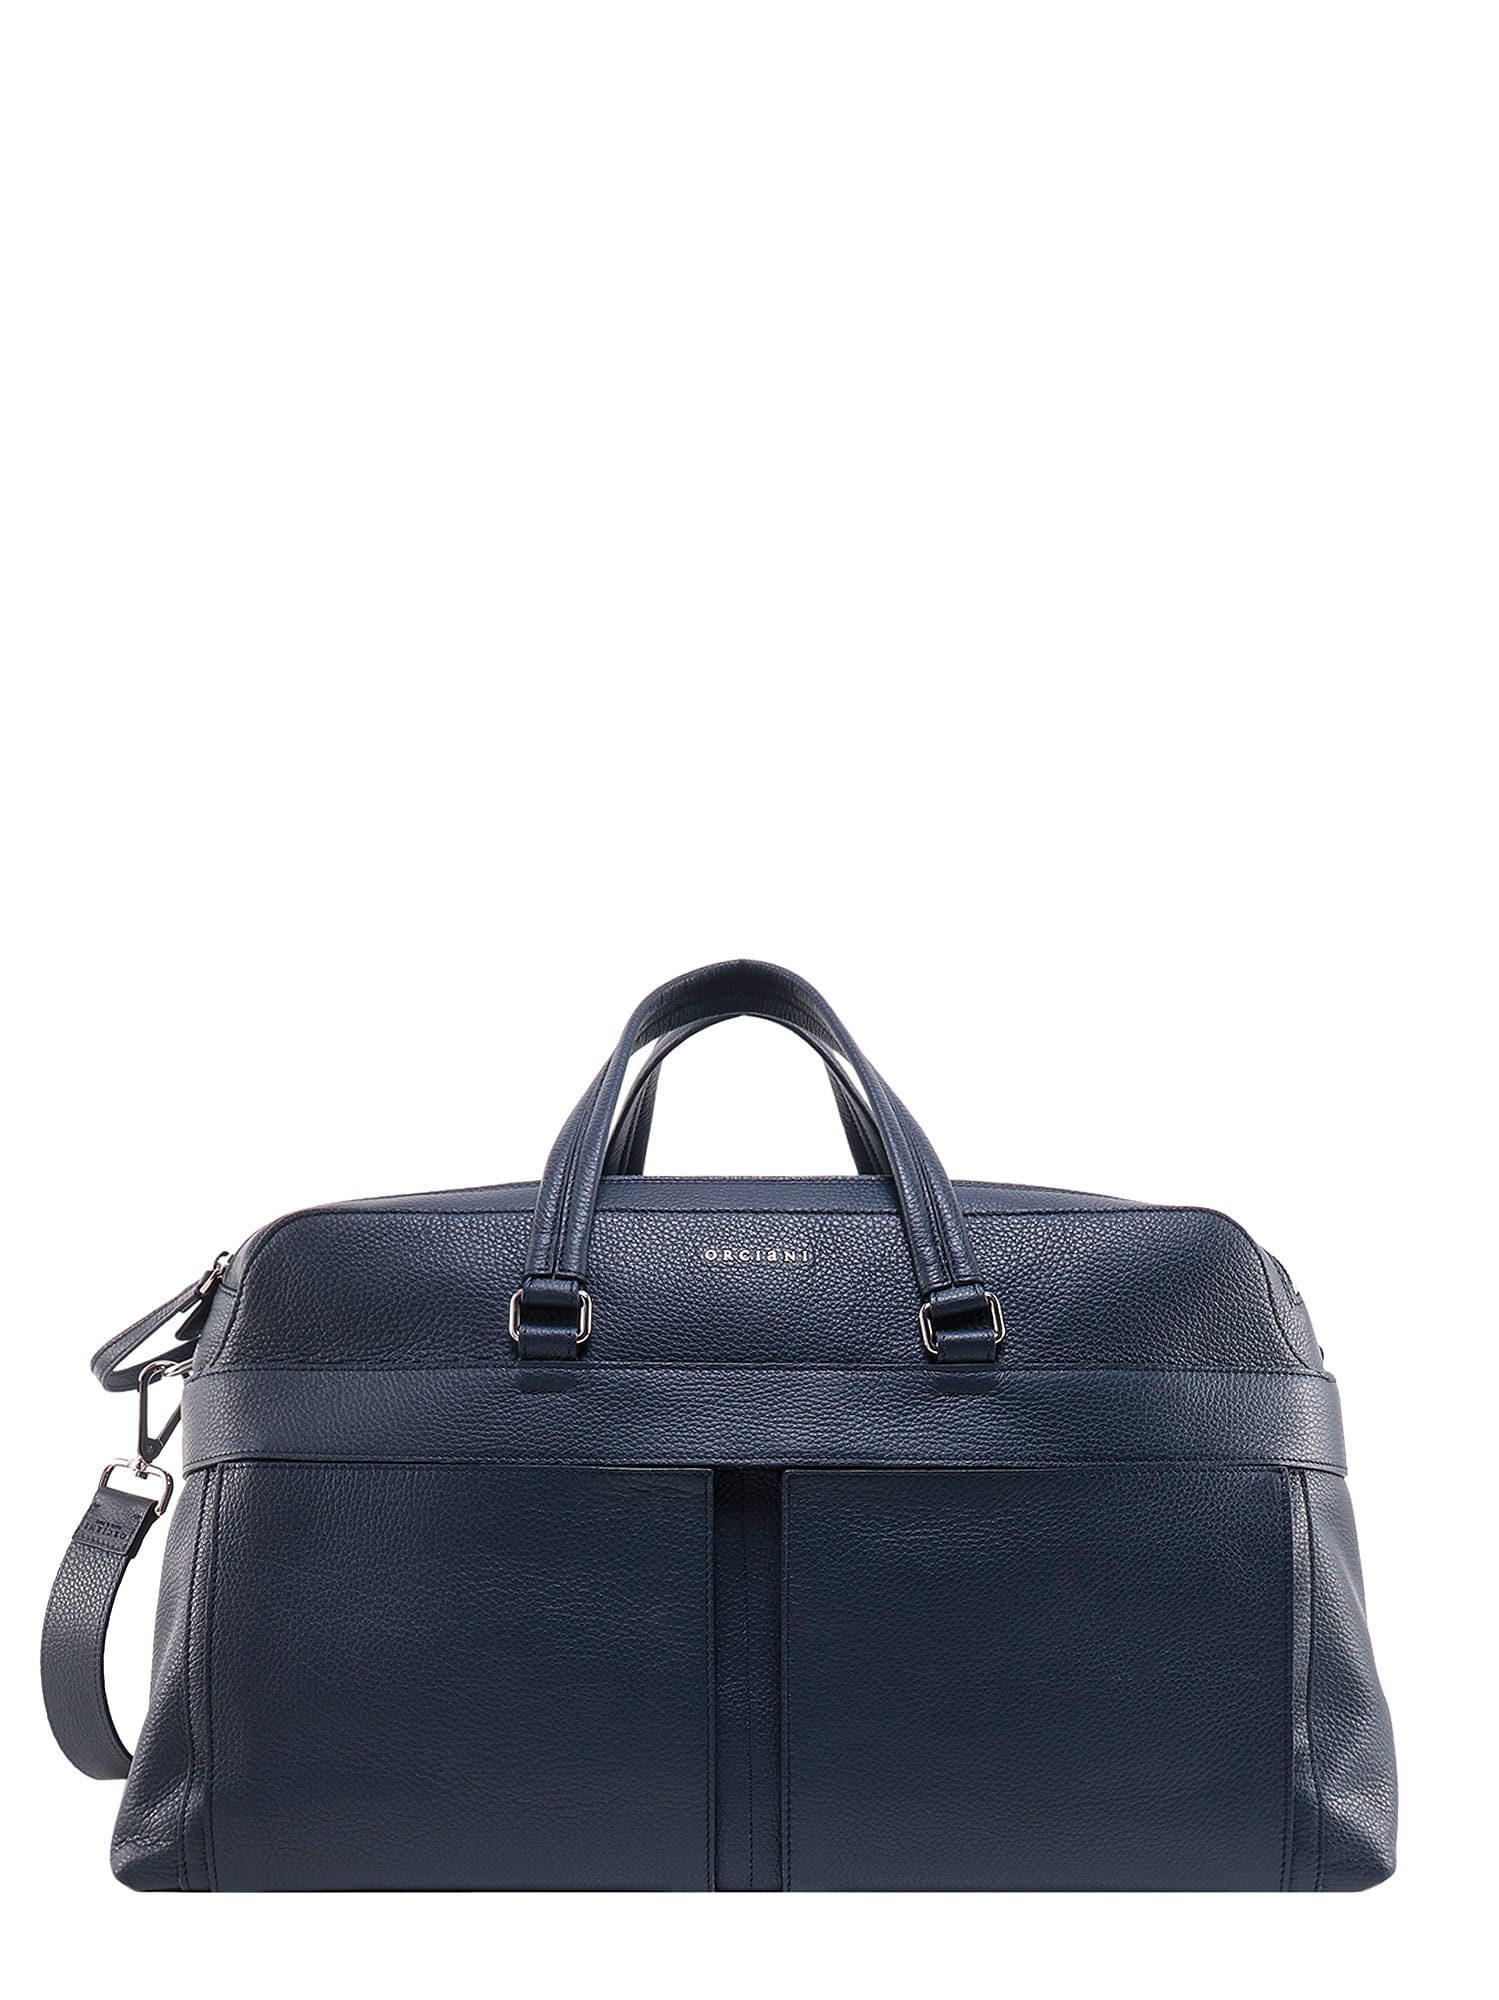 Orciani Duffle Bag In Blue